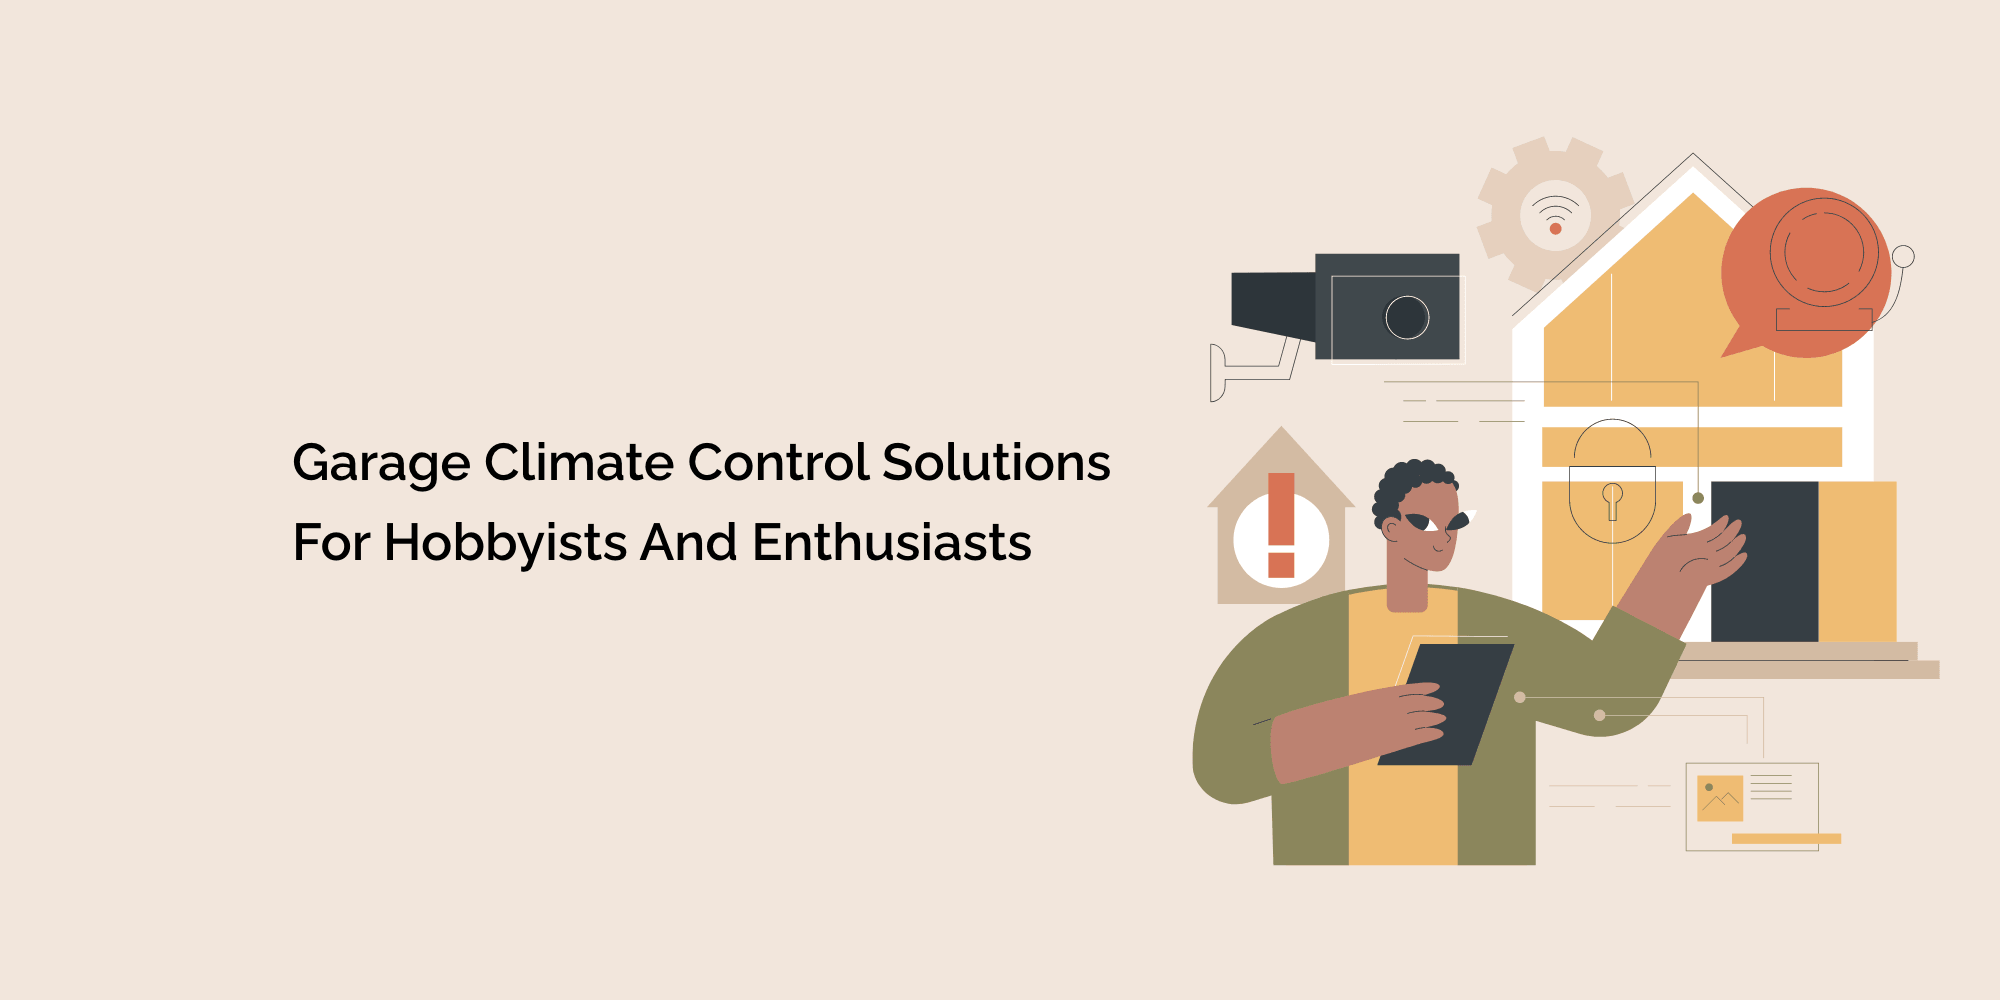 Garage Climate Control Solutions for Hobbyists and Enthusiasts